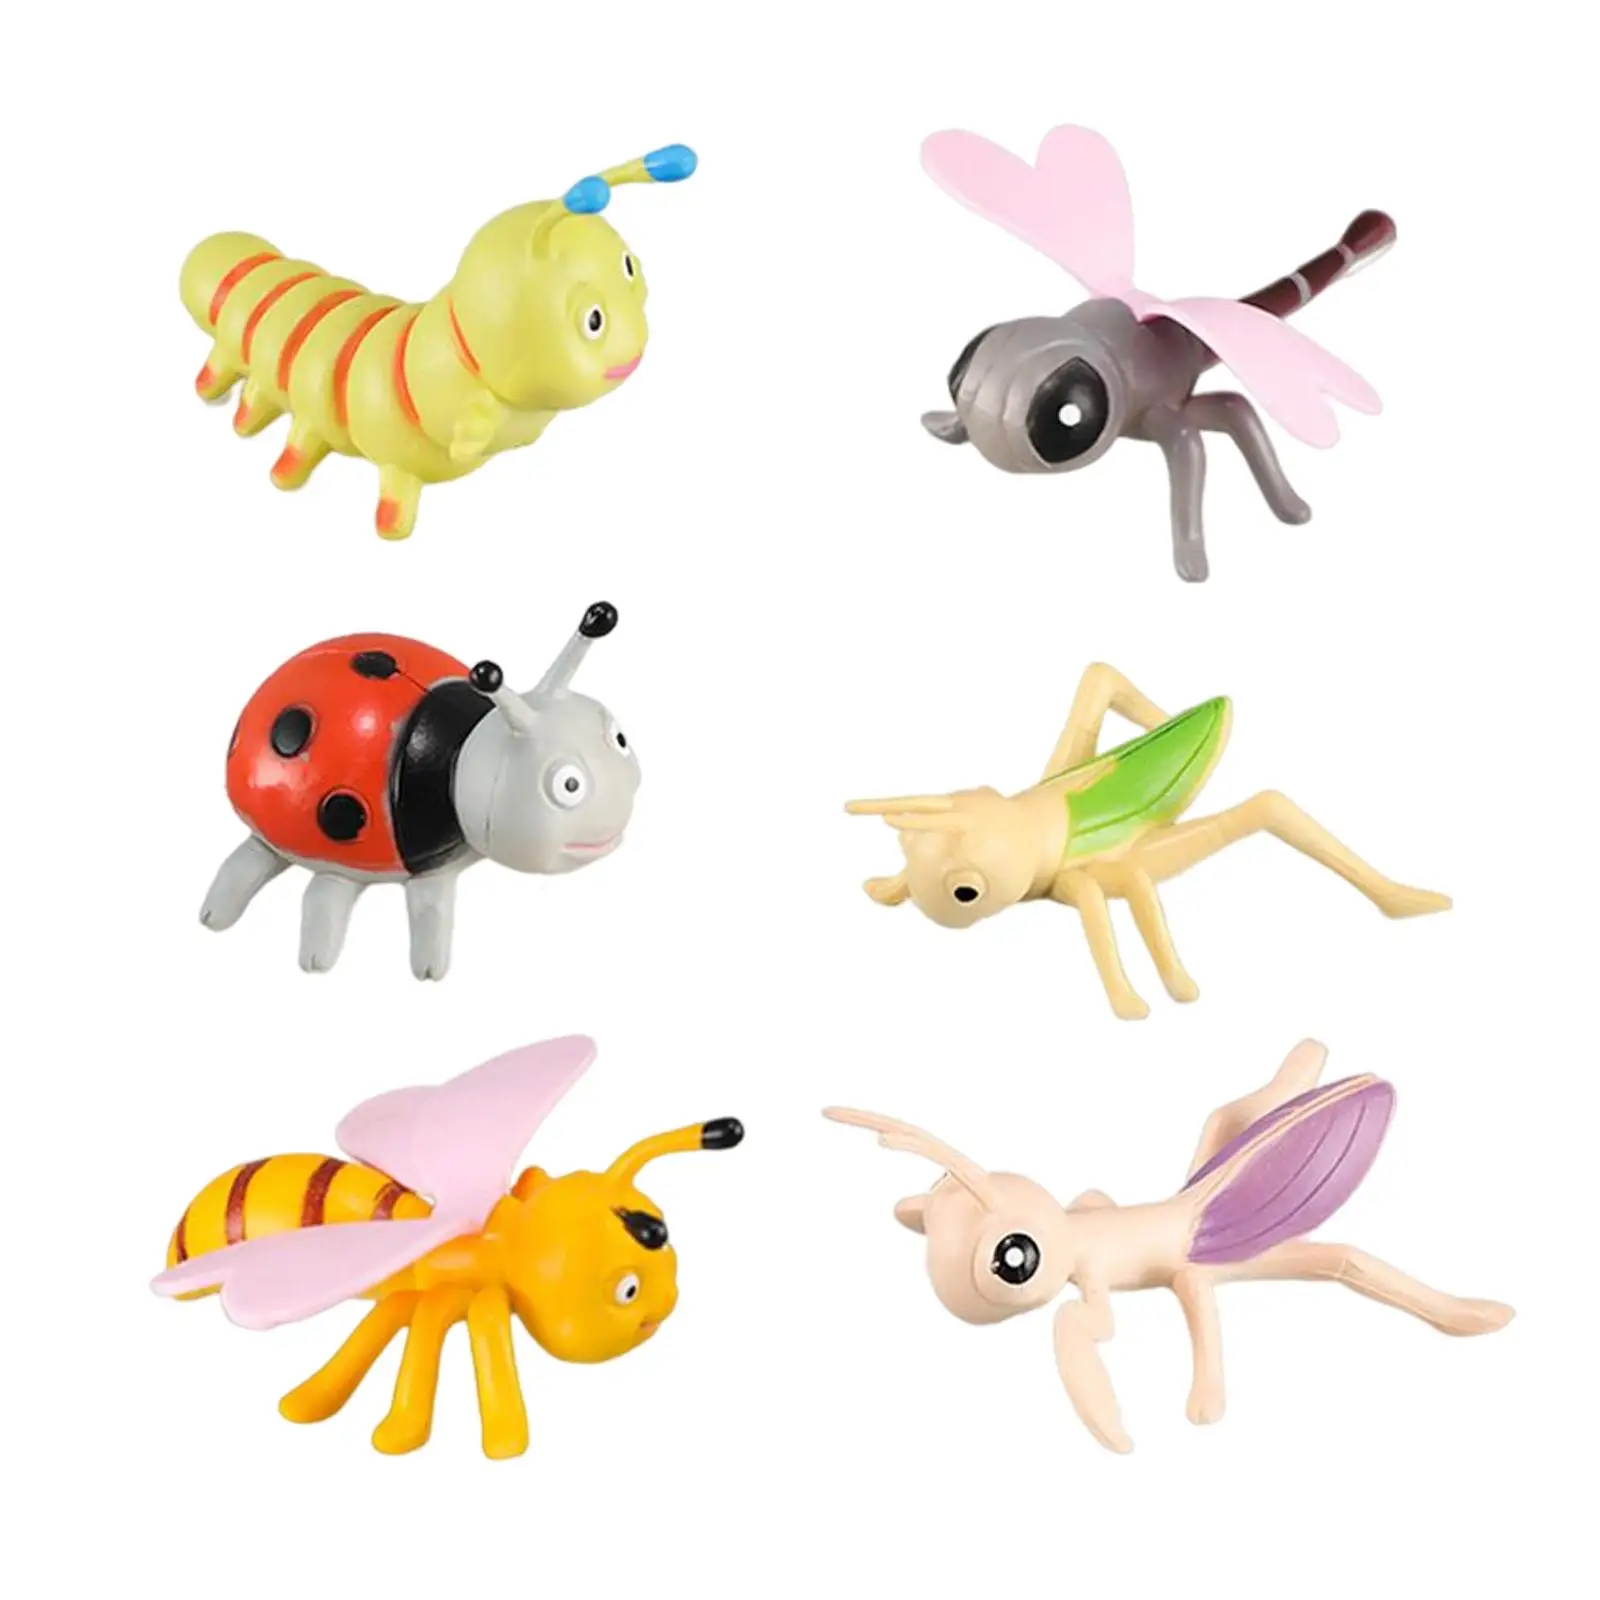 6 Pieces Animals Model Playset Children Toy Simulation Halloween Prop Birthday Gift Theme Party Tabletop Decors Party Tricks Toy